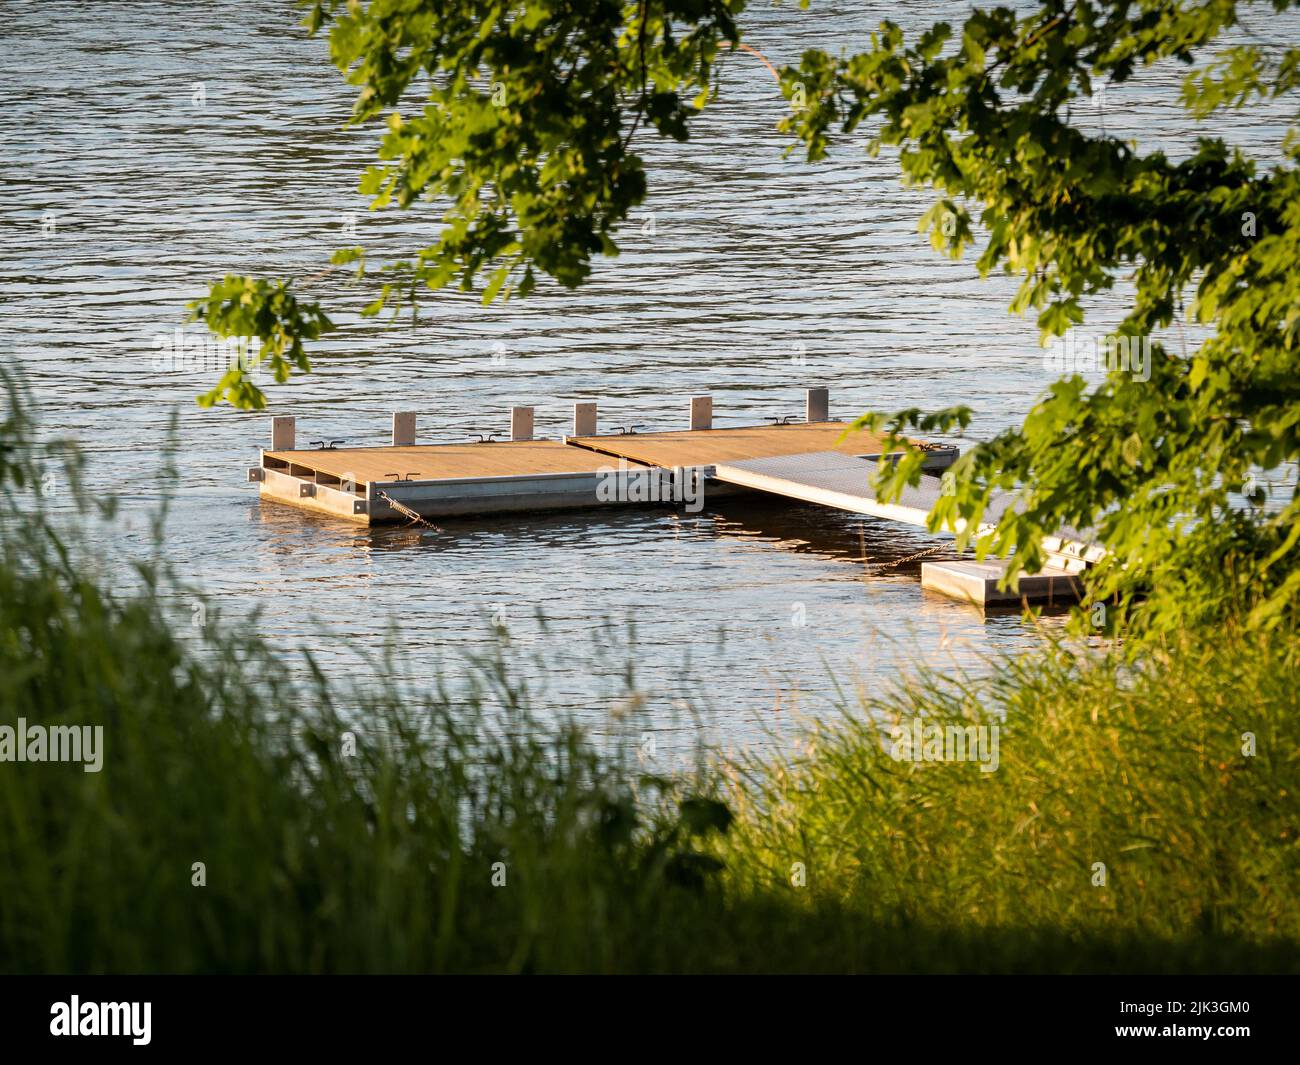 Landing stage on a river or a lake. Natural area with many green leaves during a summer evening. Wooden planks swimming on the water. Stock Photo